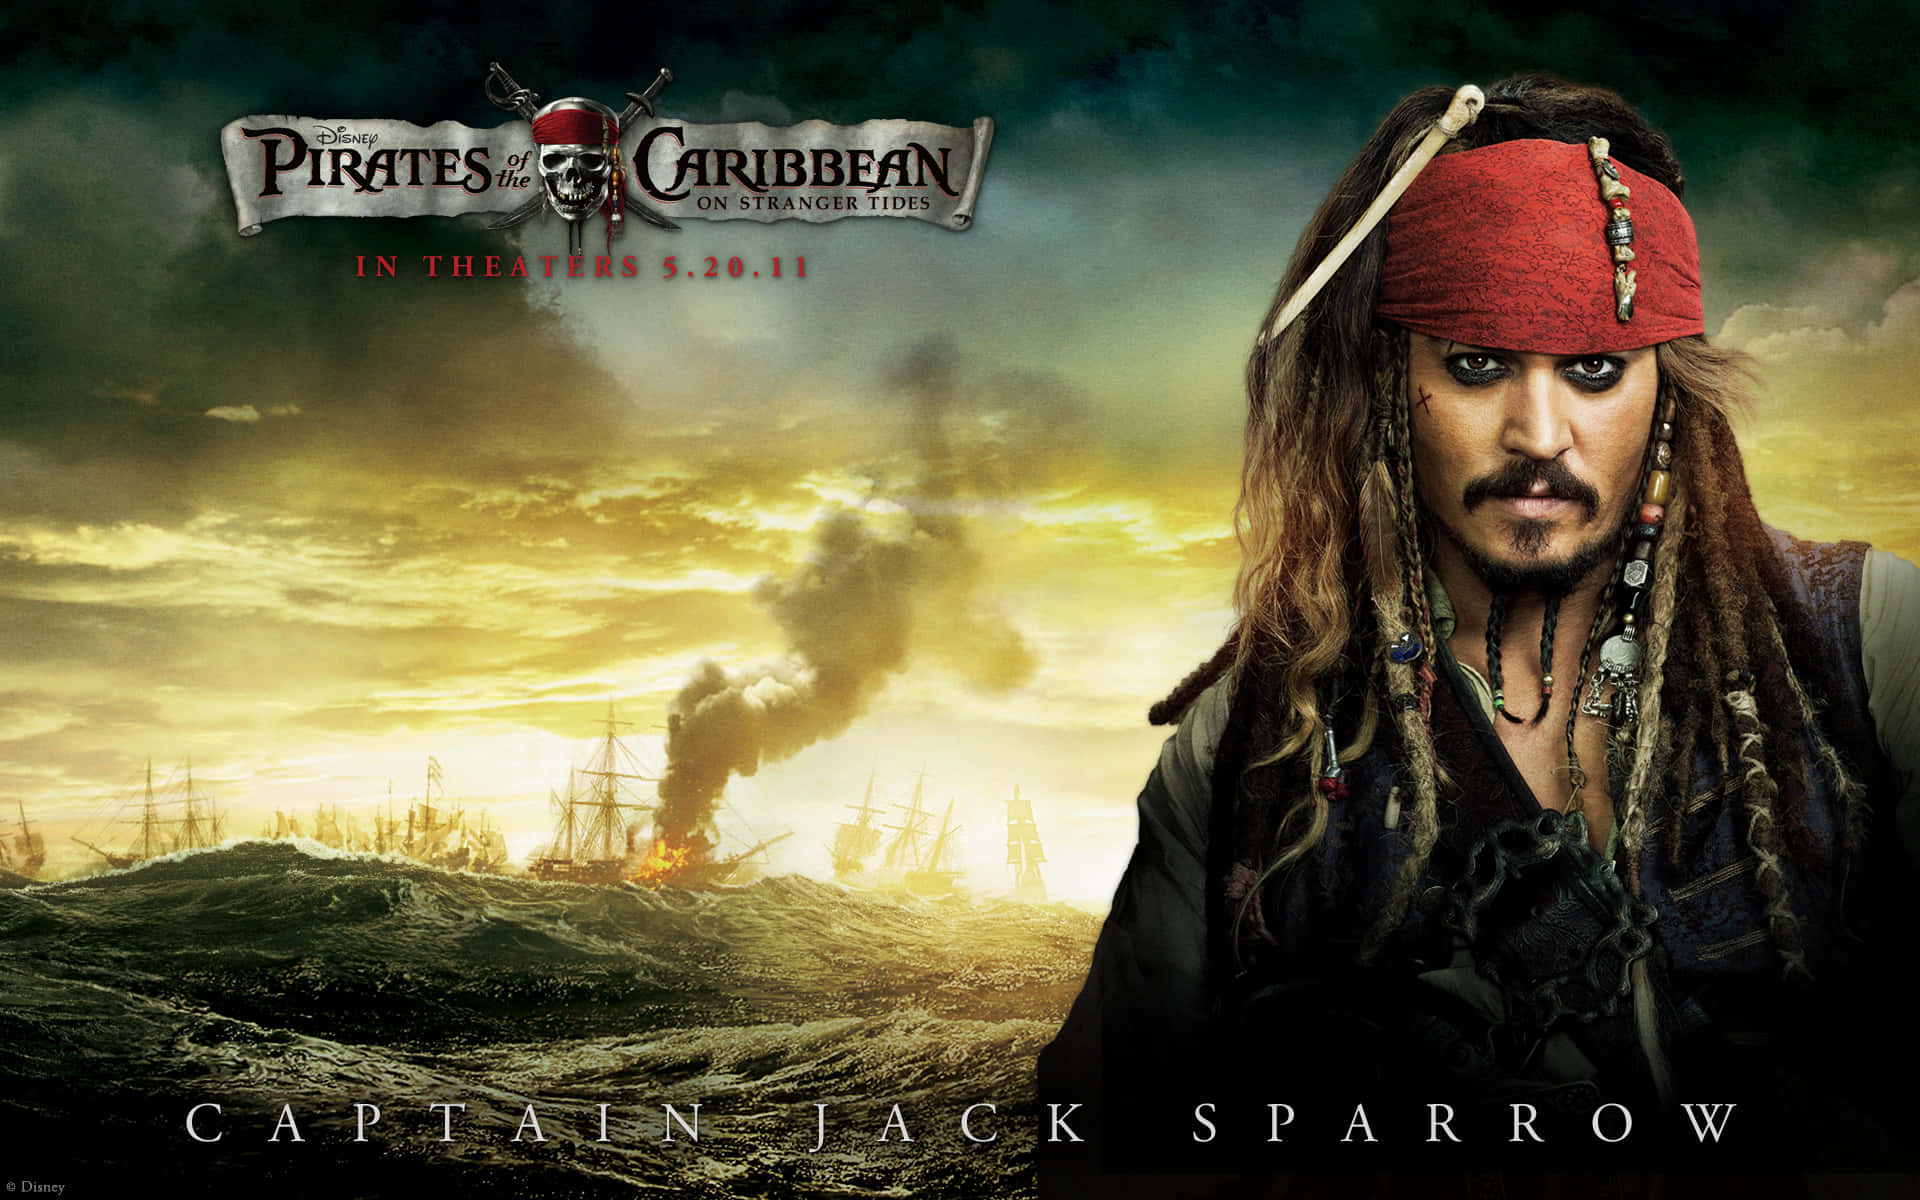 Captain Jack Sparrow Sailing the High Seas in Pirates of The Caribbean